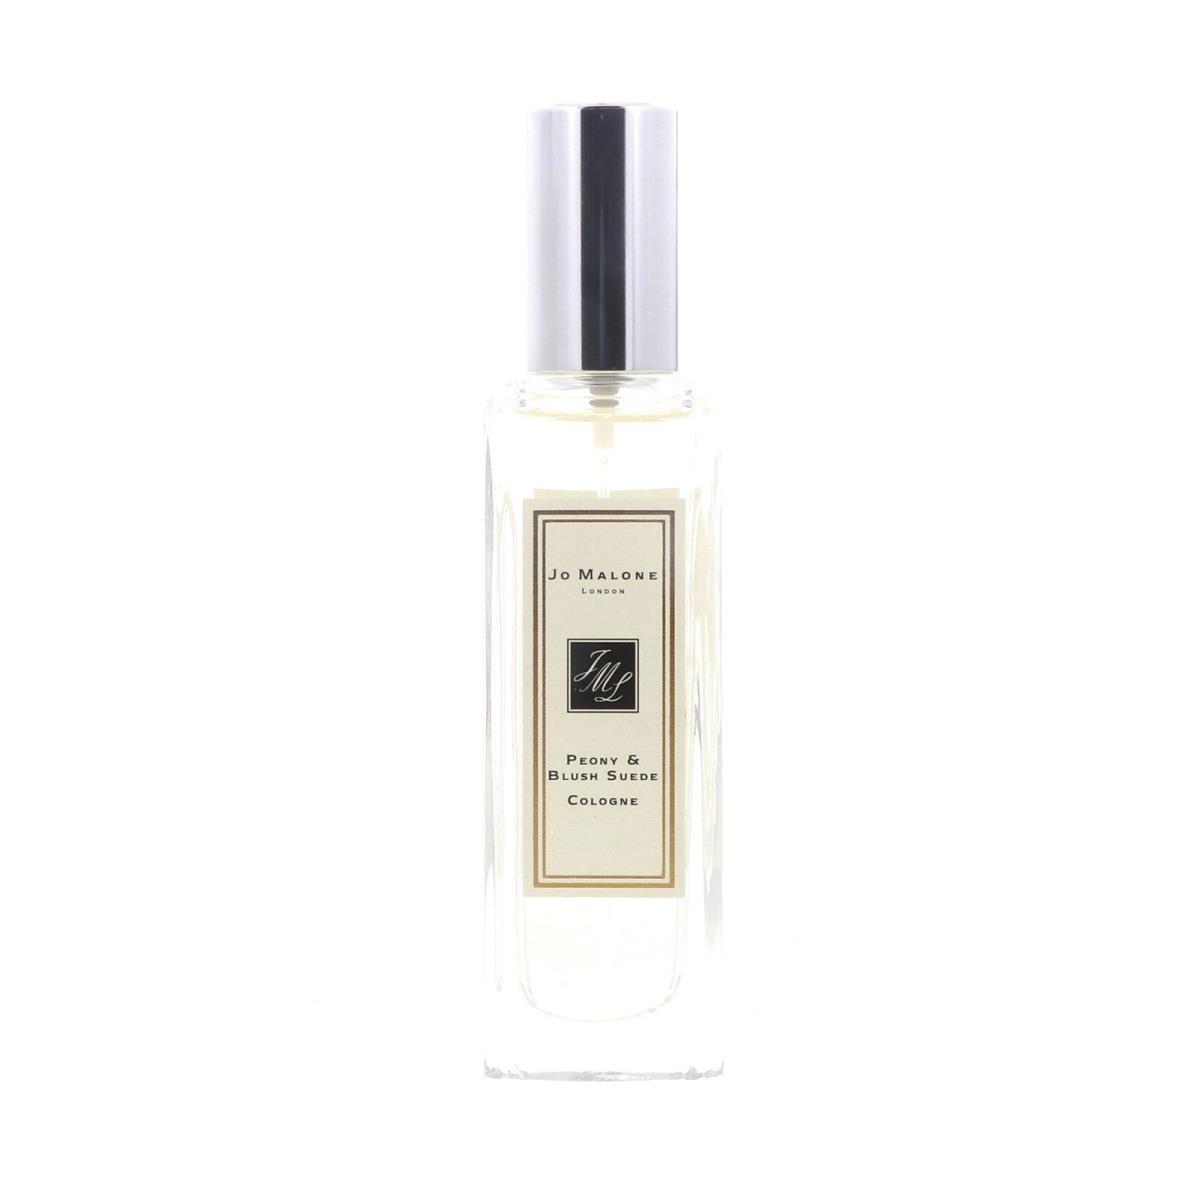 Jo Malone Peony and Blush Suede Cologne 1 oz